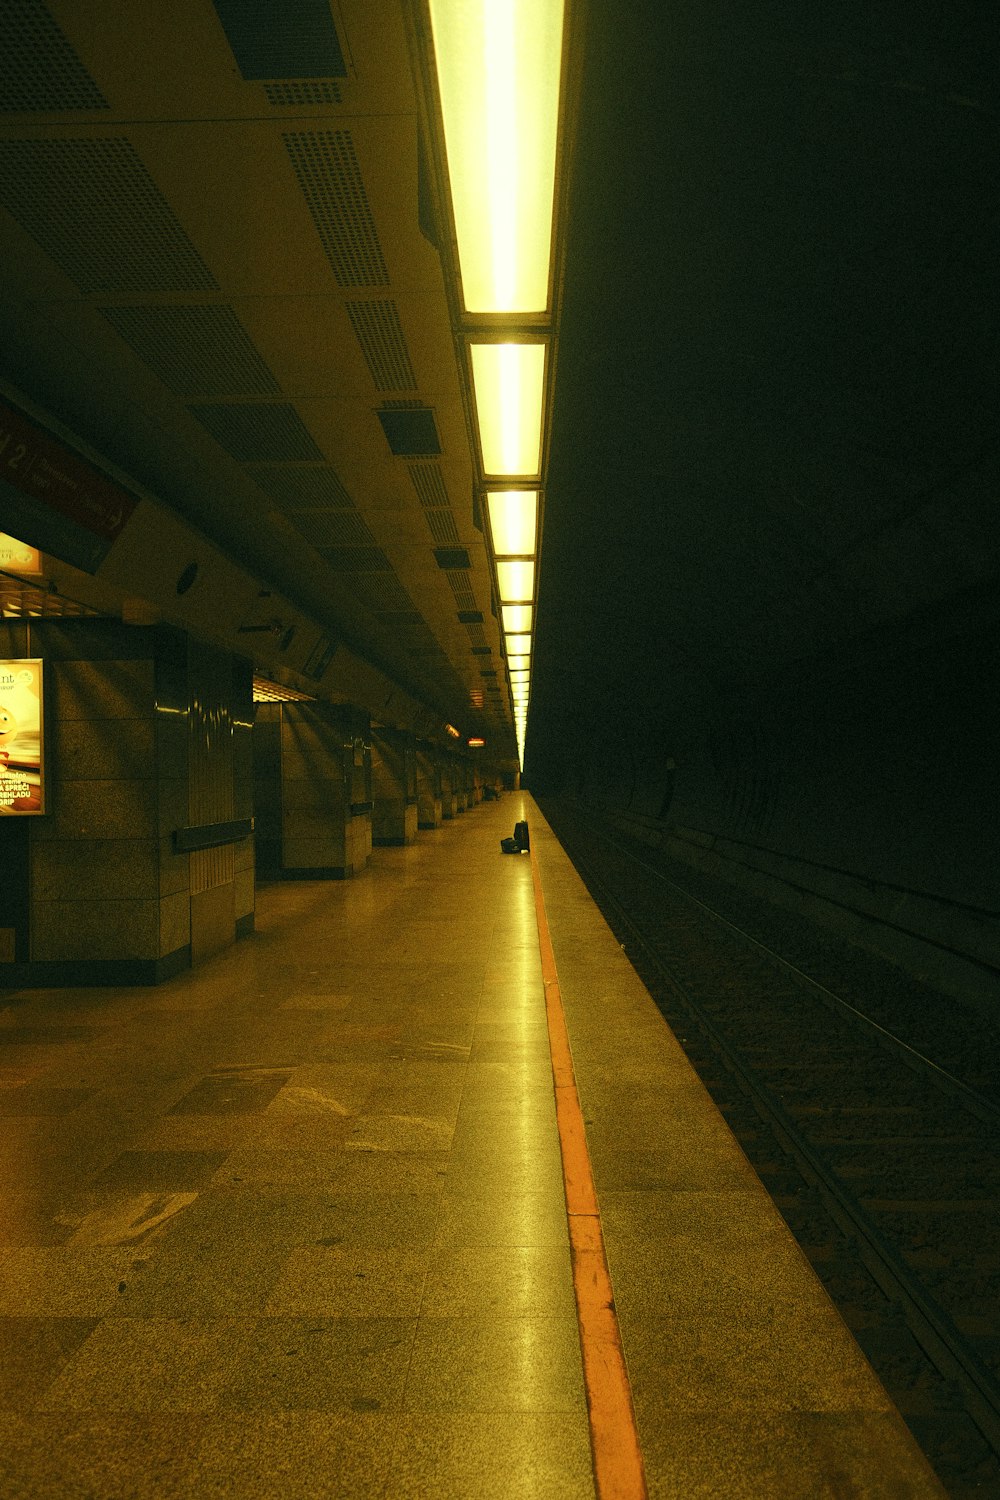 a train station with a person sitting on the platform